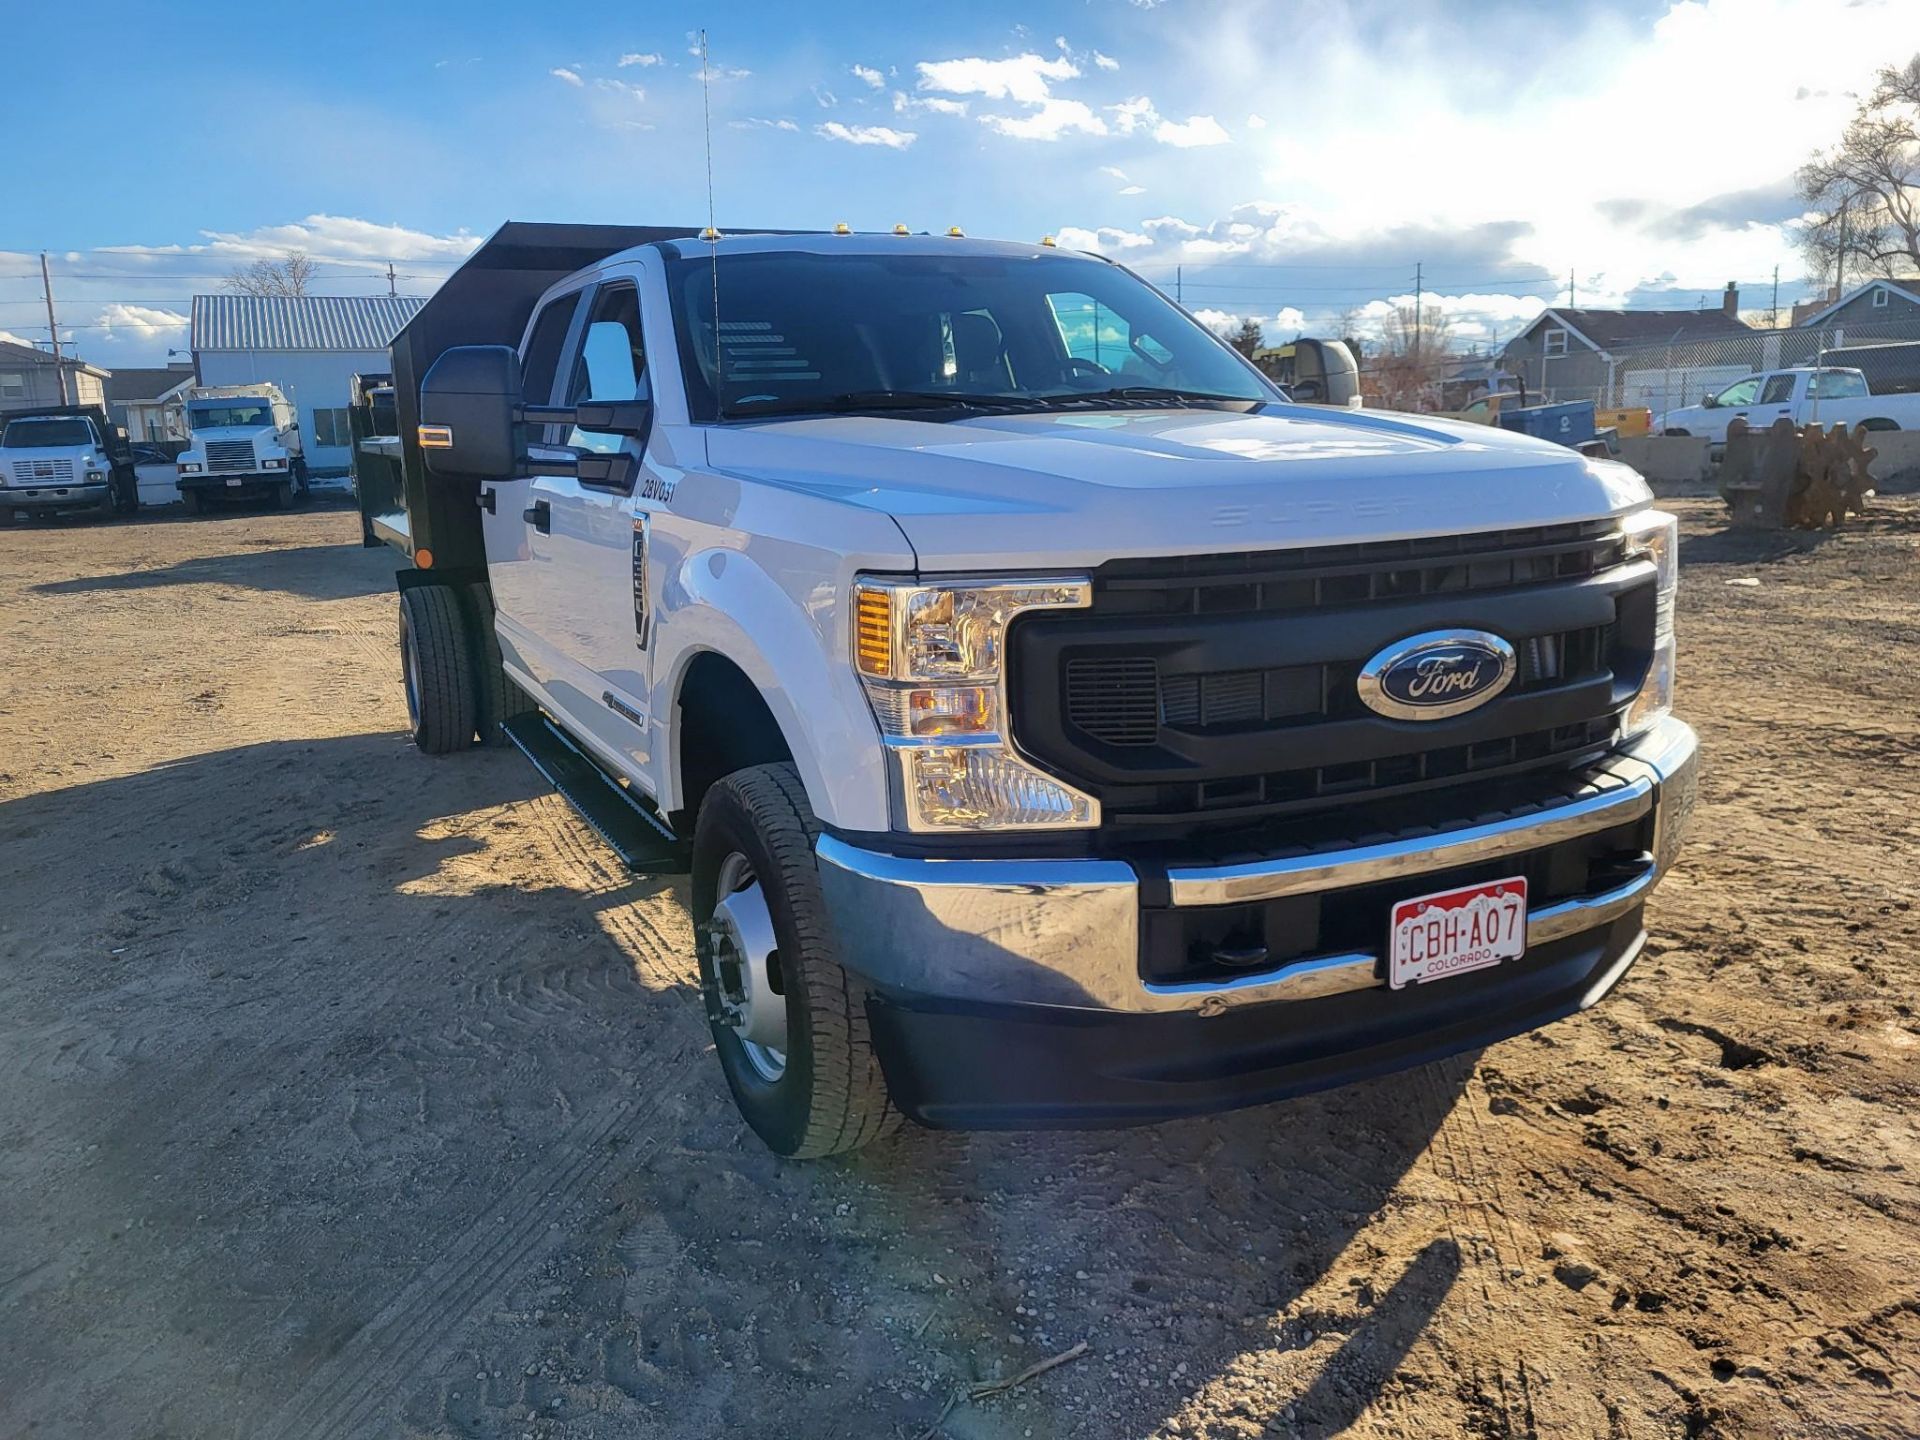 2021 FORD F350 CREW CAB DUALLY DIESEL FLATBED DUMP TRUCK 19,500 MILES! - Image 4 of 37